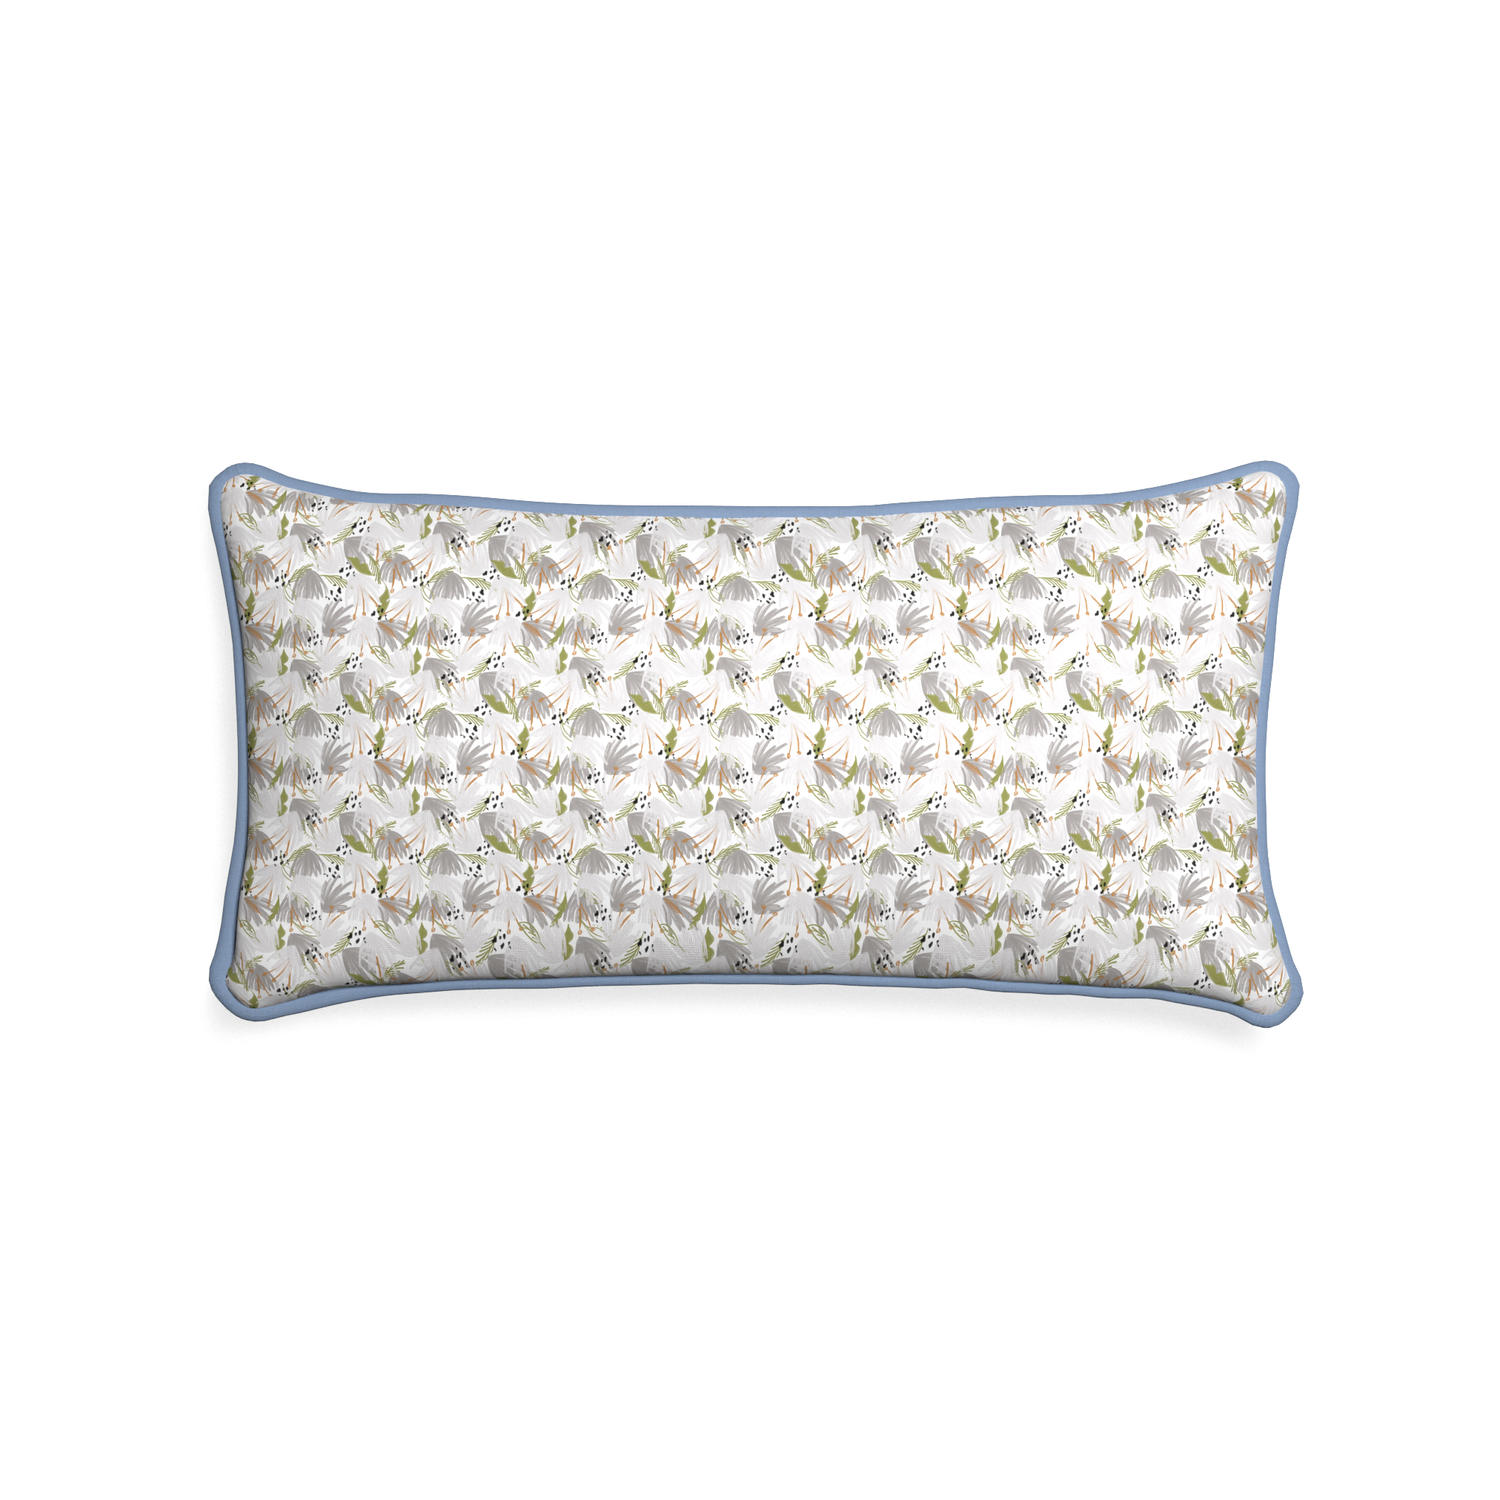 Midi-lumbar eden grey custom grey floralpillow with sky piping on white background